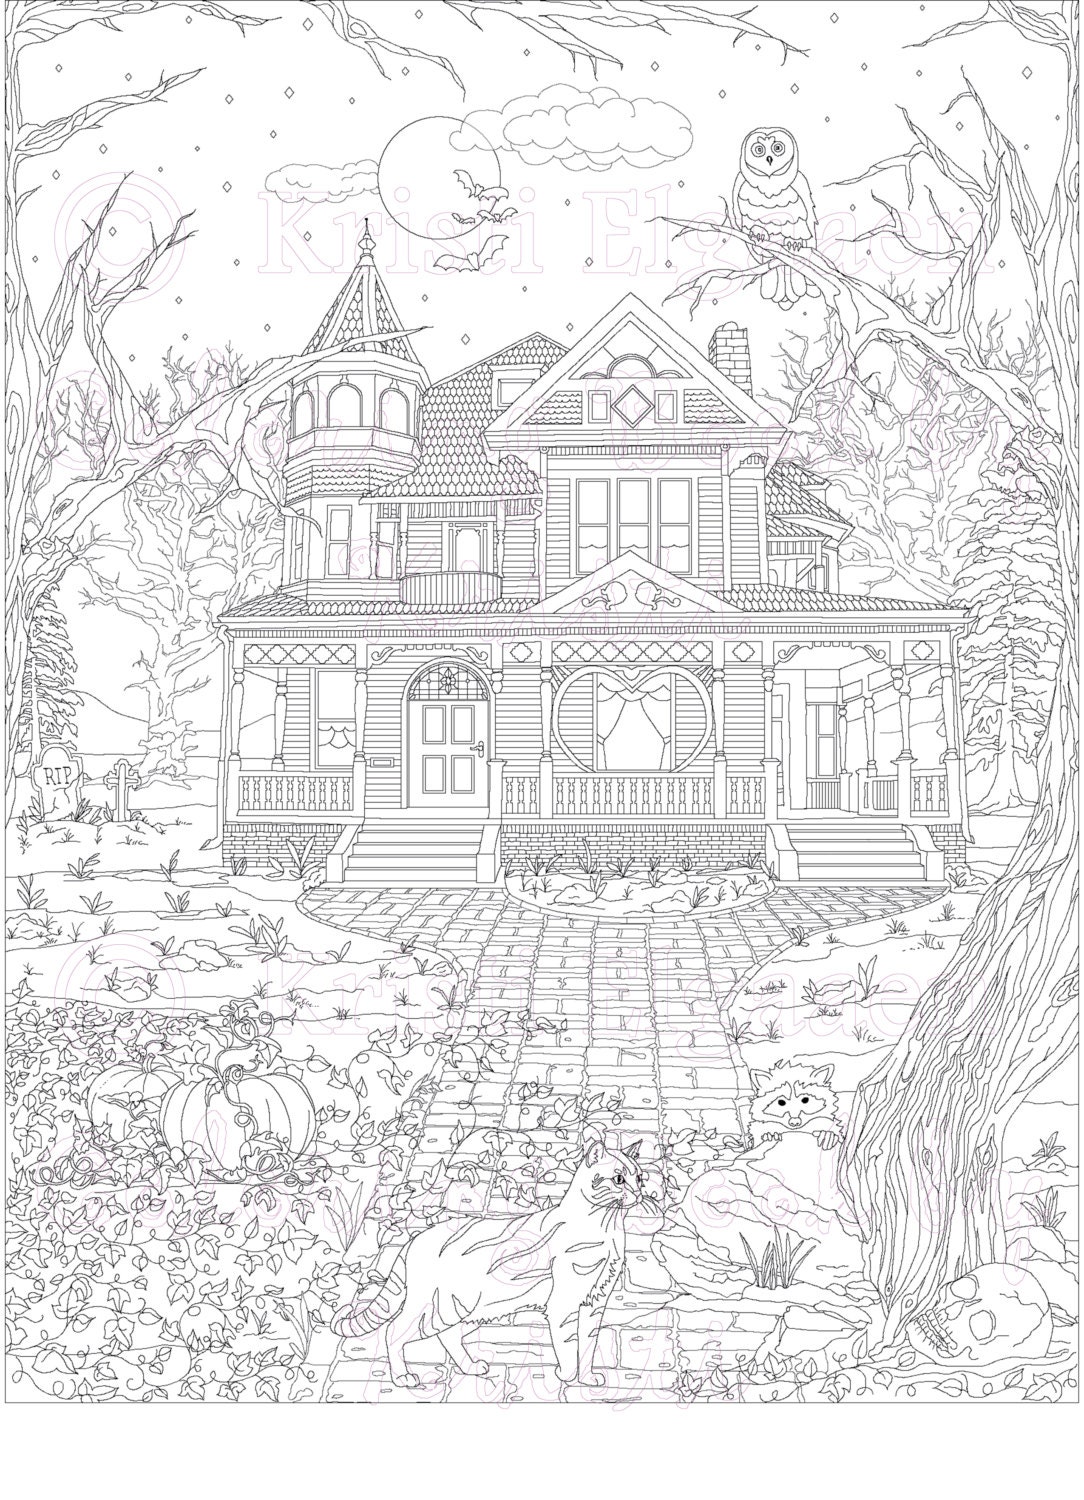 Download Adult Coloring Page Coloring pages Digital Download Haunted